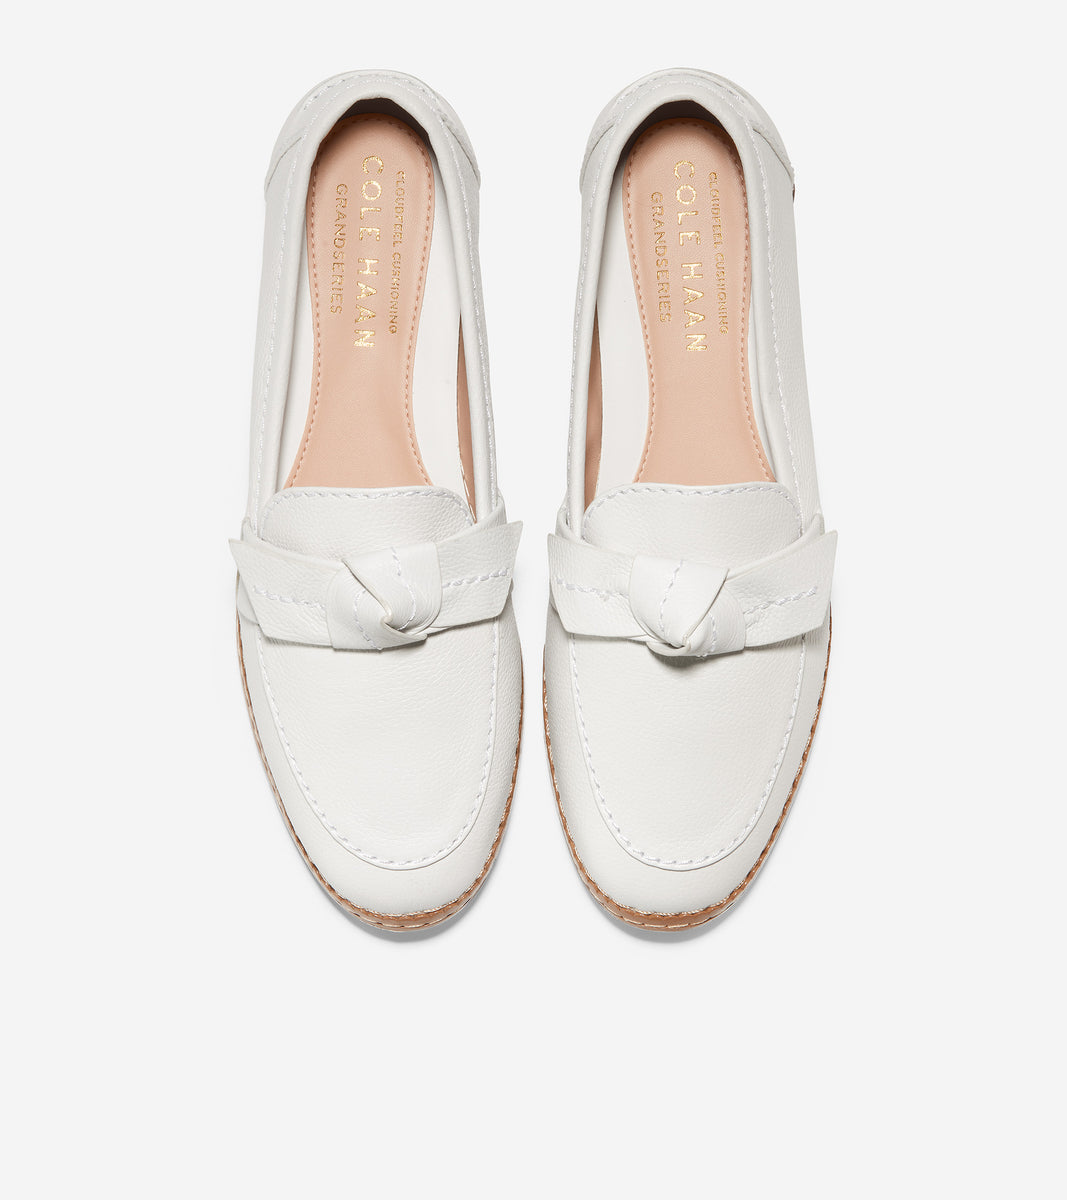 Women's Cloudfeel All-Day Bow Loafer